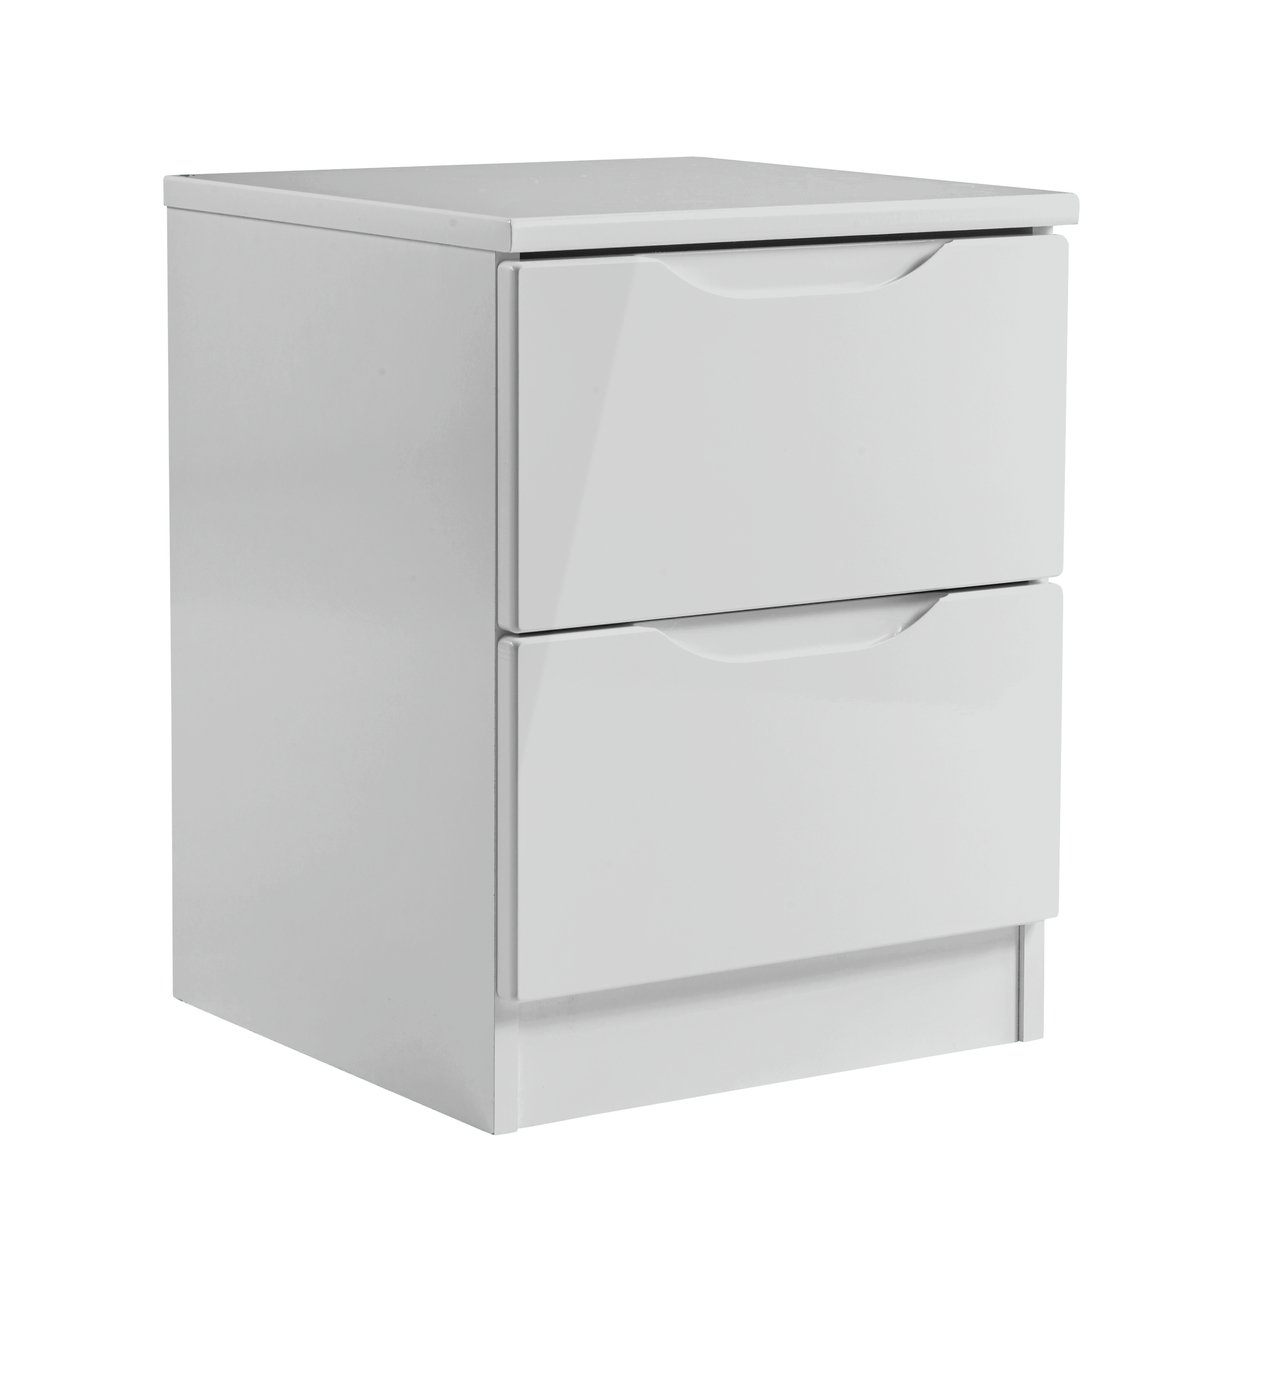 Legato 2 Drawer Bedside Table - Grey Gloss